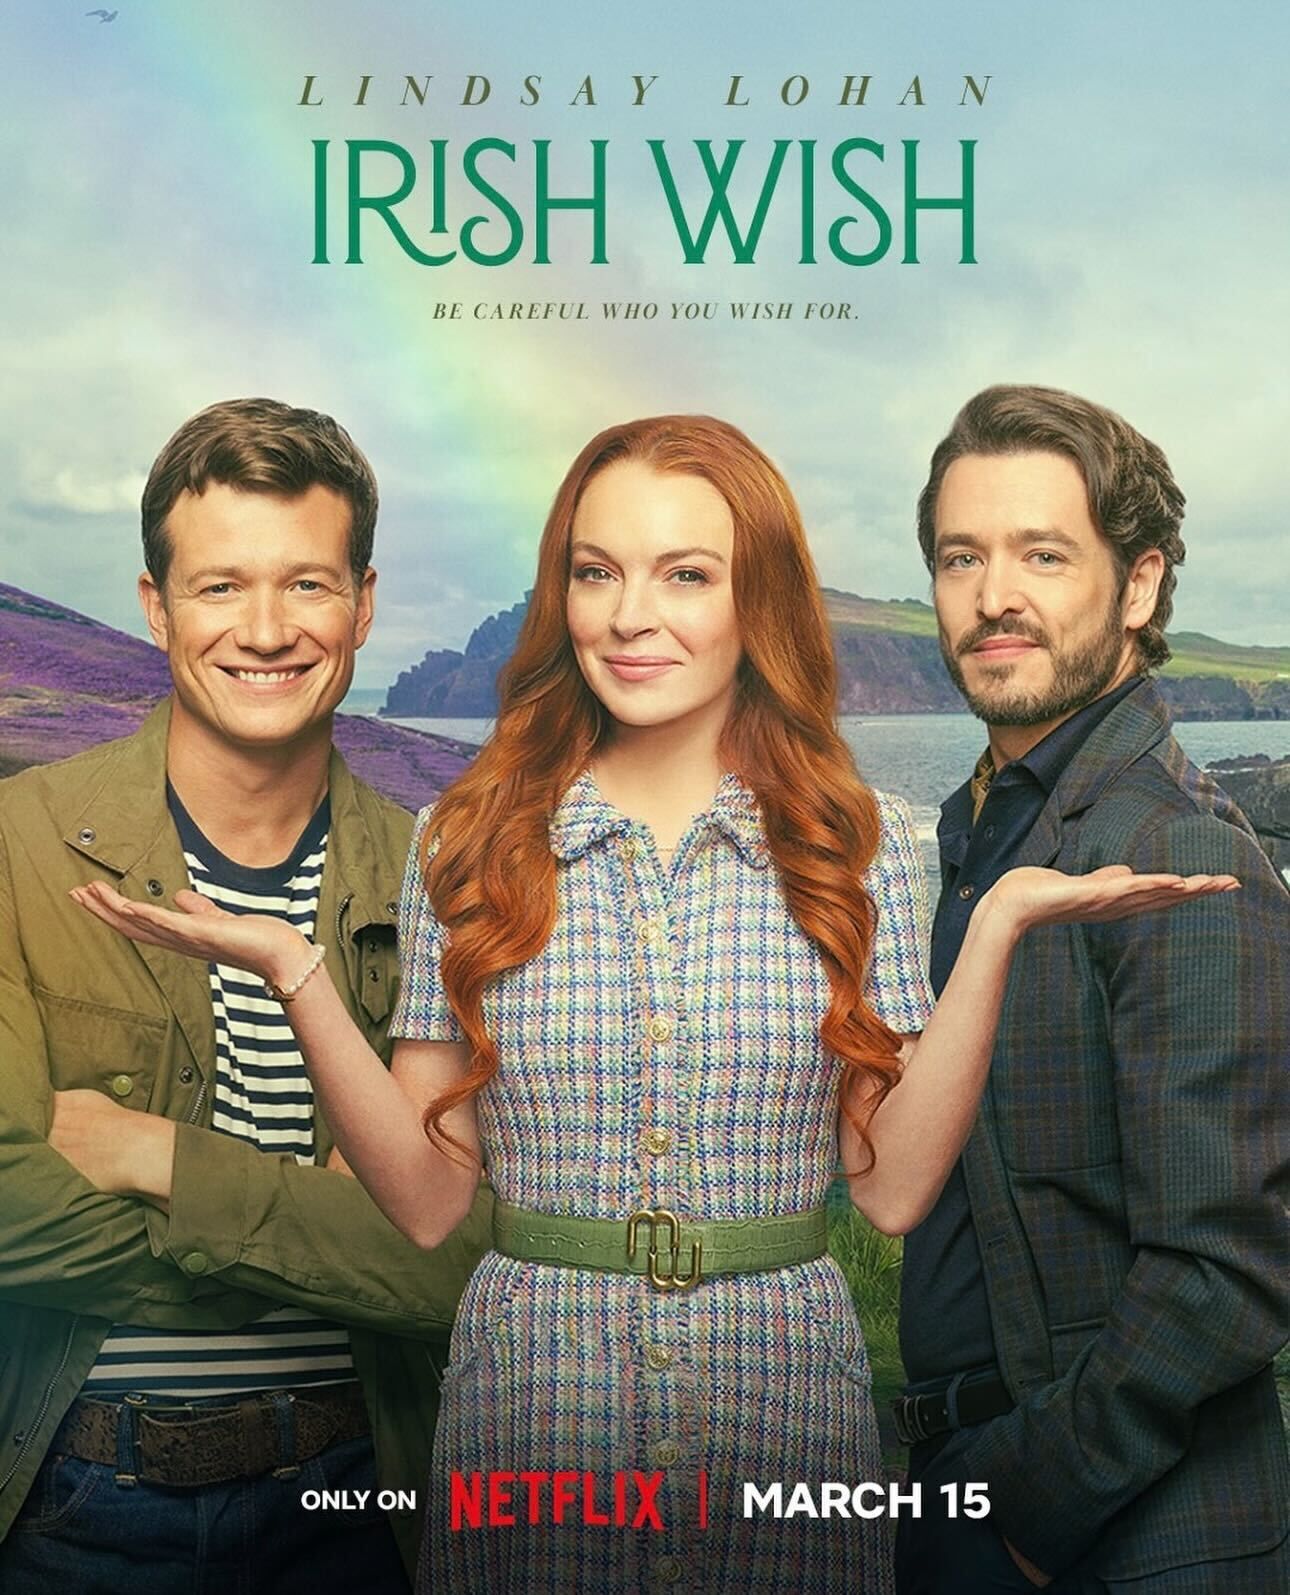 A poster for Irish Wish featuring Lindsay Lohan, Ed Speleers, and Alexander Vlahos